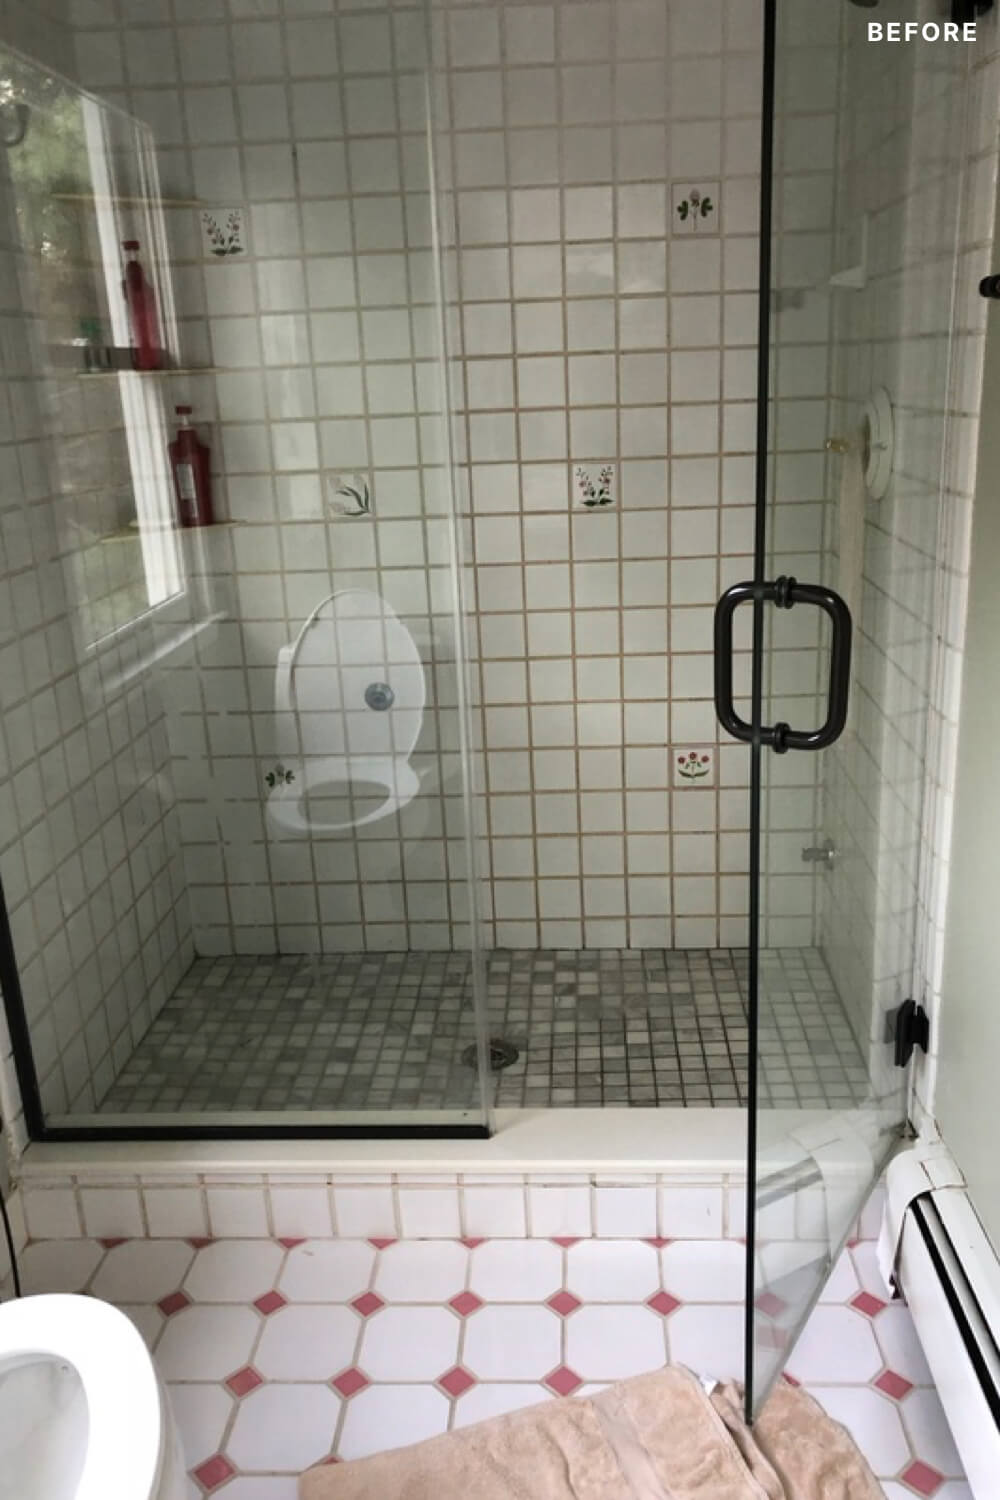 White shower area with tempered glass doors before renovation